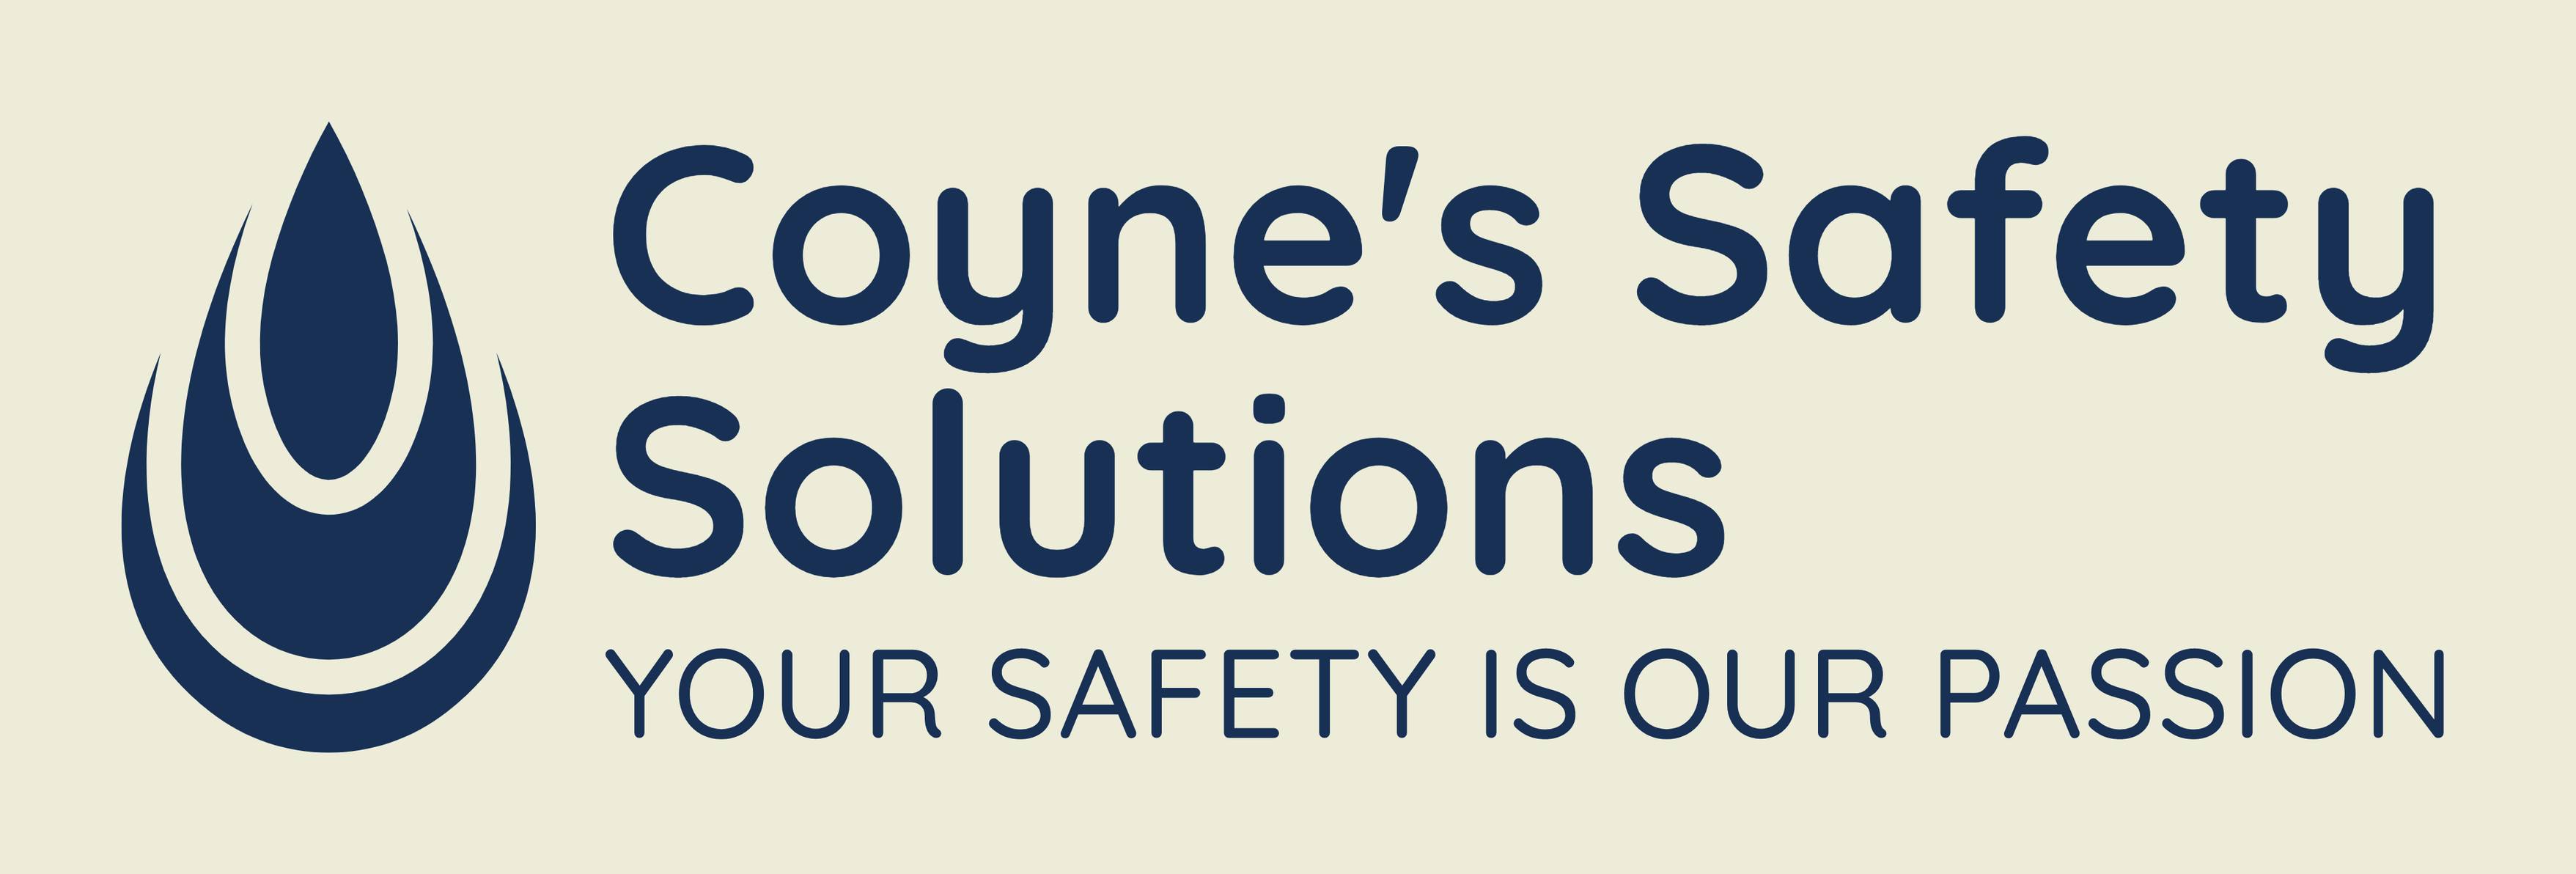 Coyne's Safety Solutions